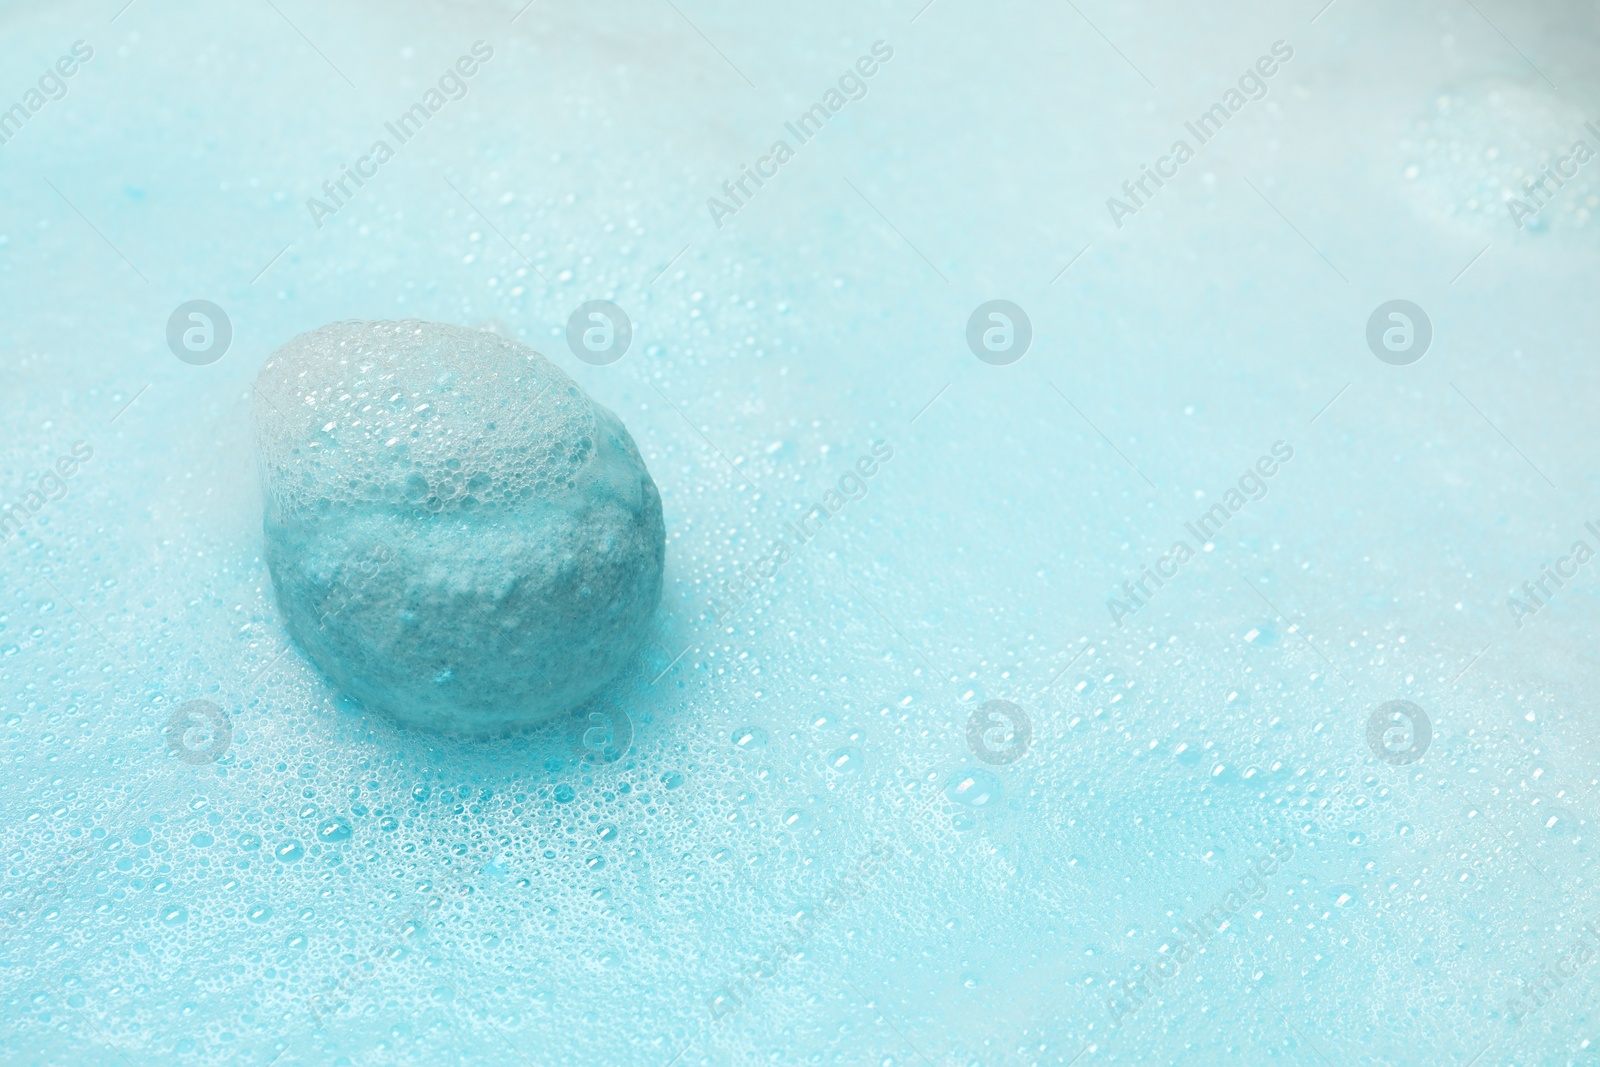 Photo of Light blue bath bomb dissolving in water. Space for text